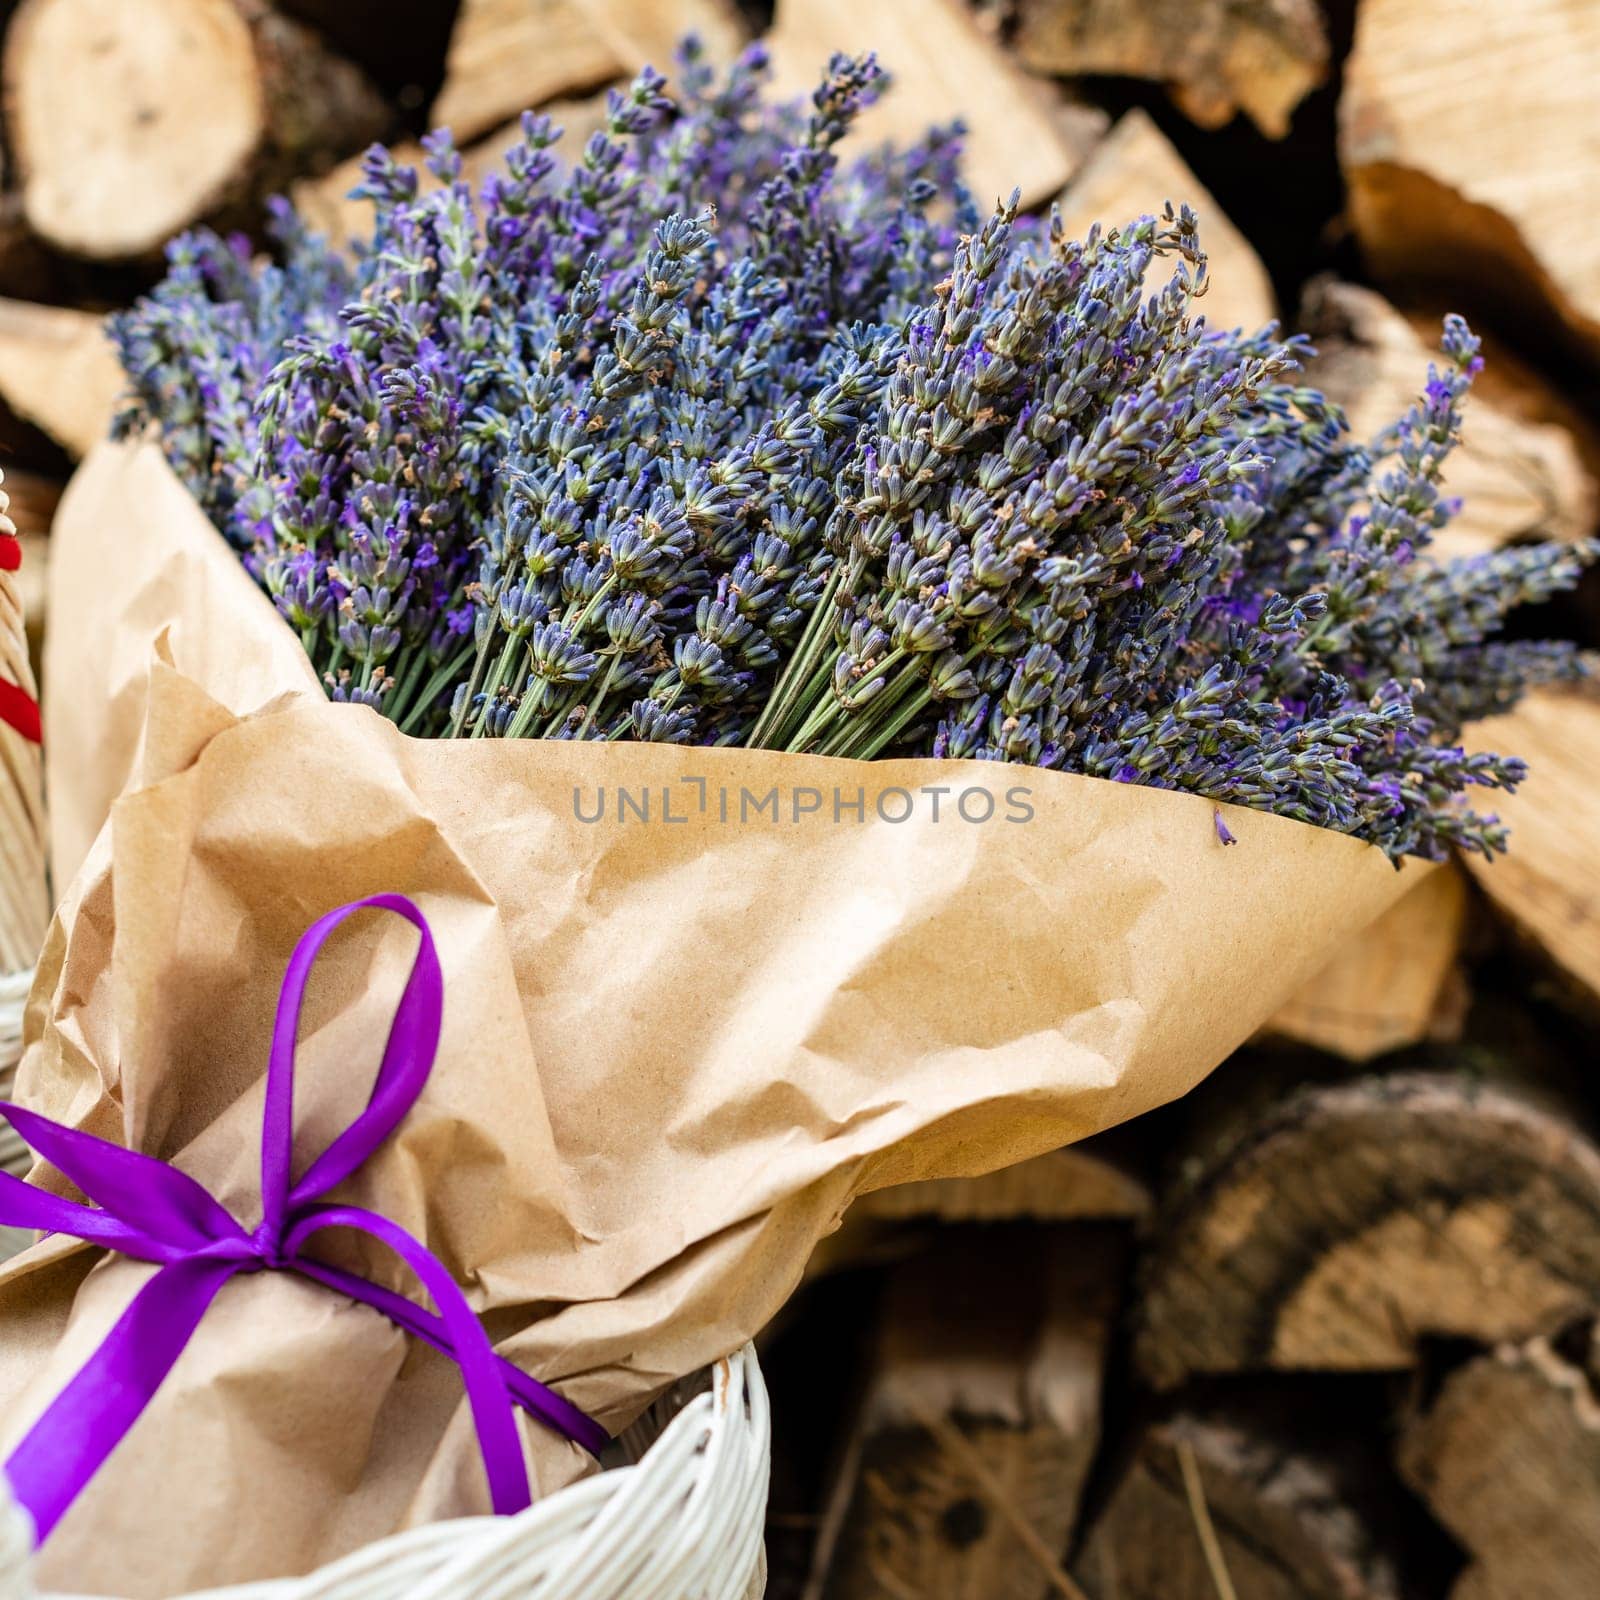 A lush and large bouquet of lavender wrapped in brown paper on a background of firewood